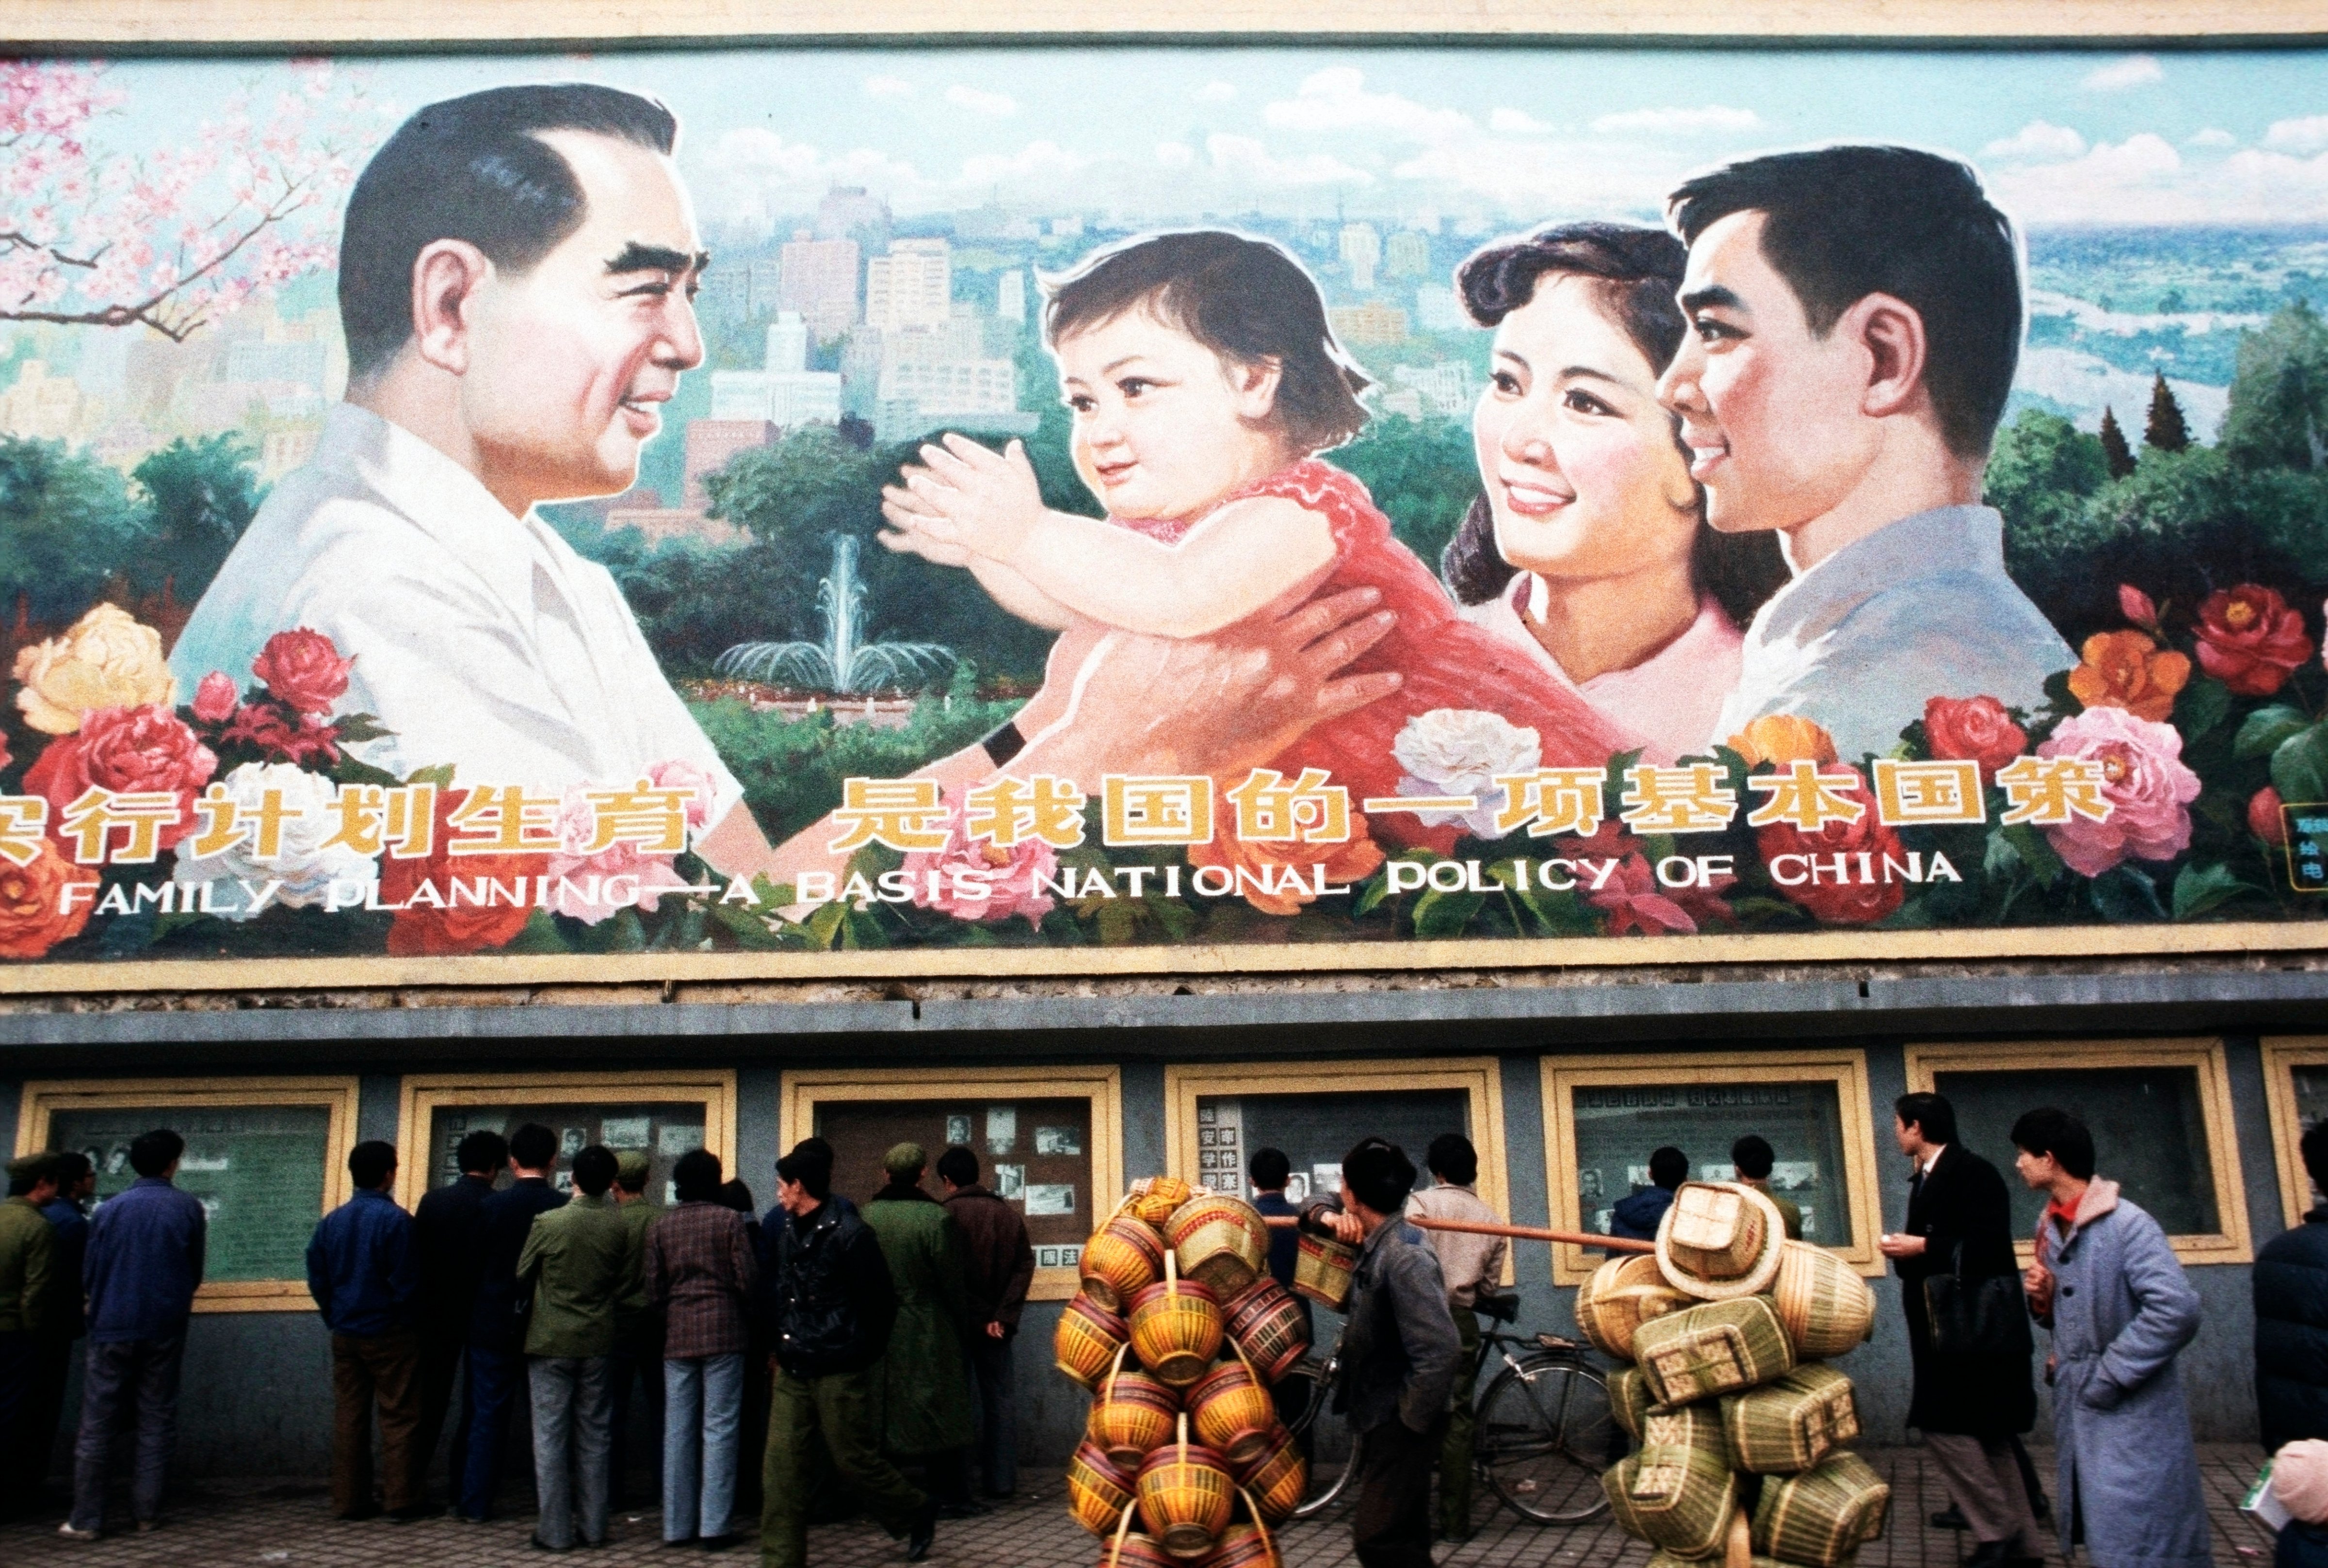 Pedestrians and a man carrying baskets pass by a huge billboard extolling the virtues of China's "One Child Family" policy. (Peter Charlesworth—Getty Images)